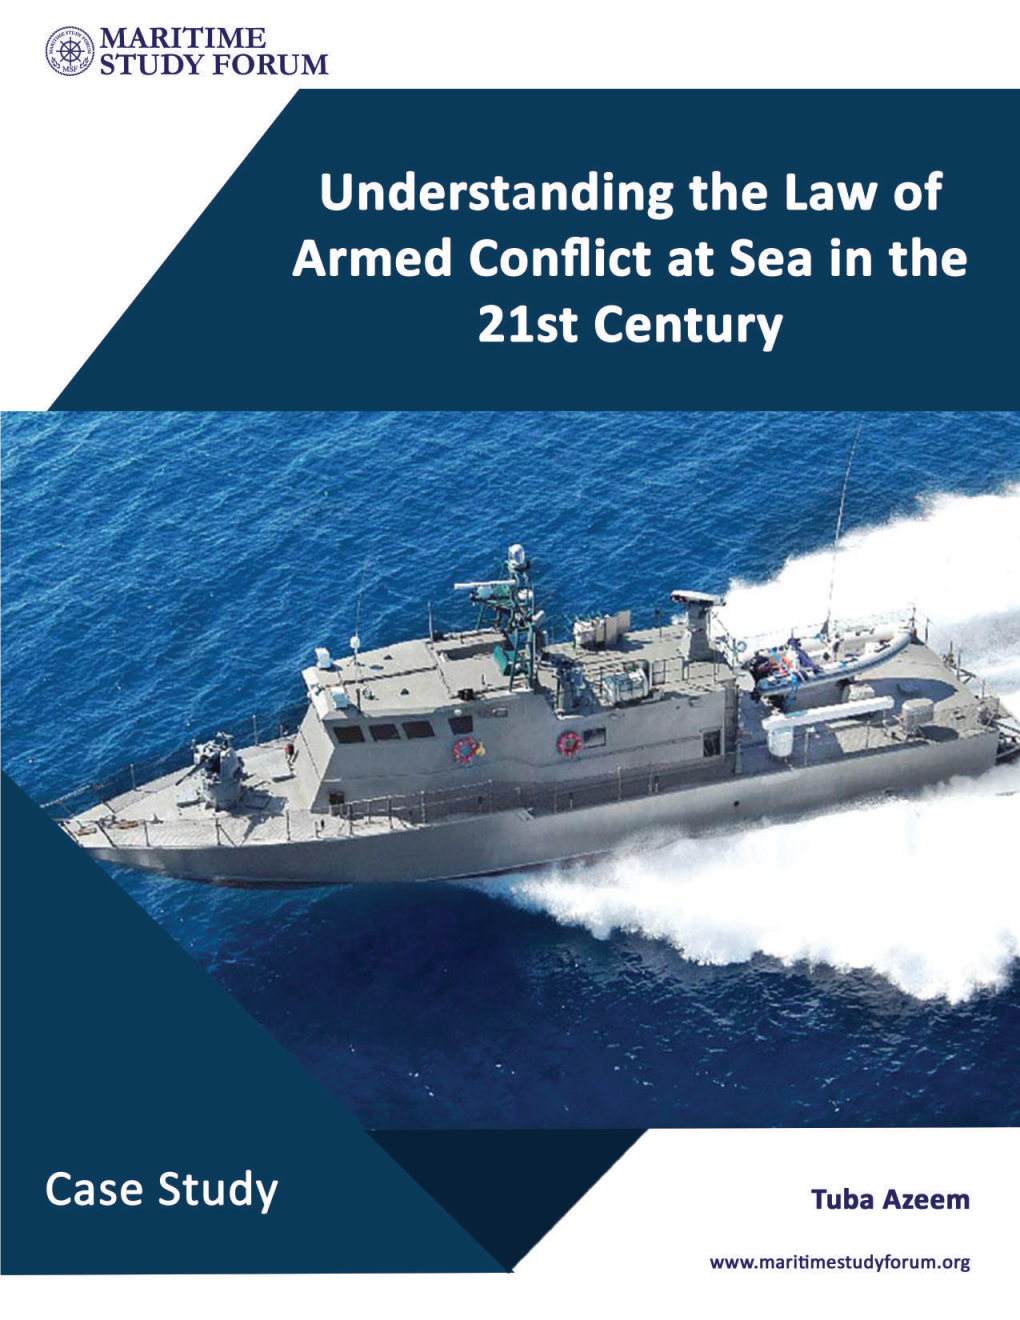 Understanding the Law of Armed Conflict at Sea in the 21St Century